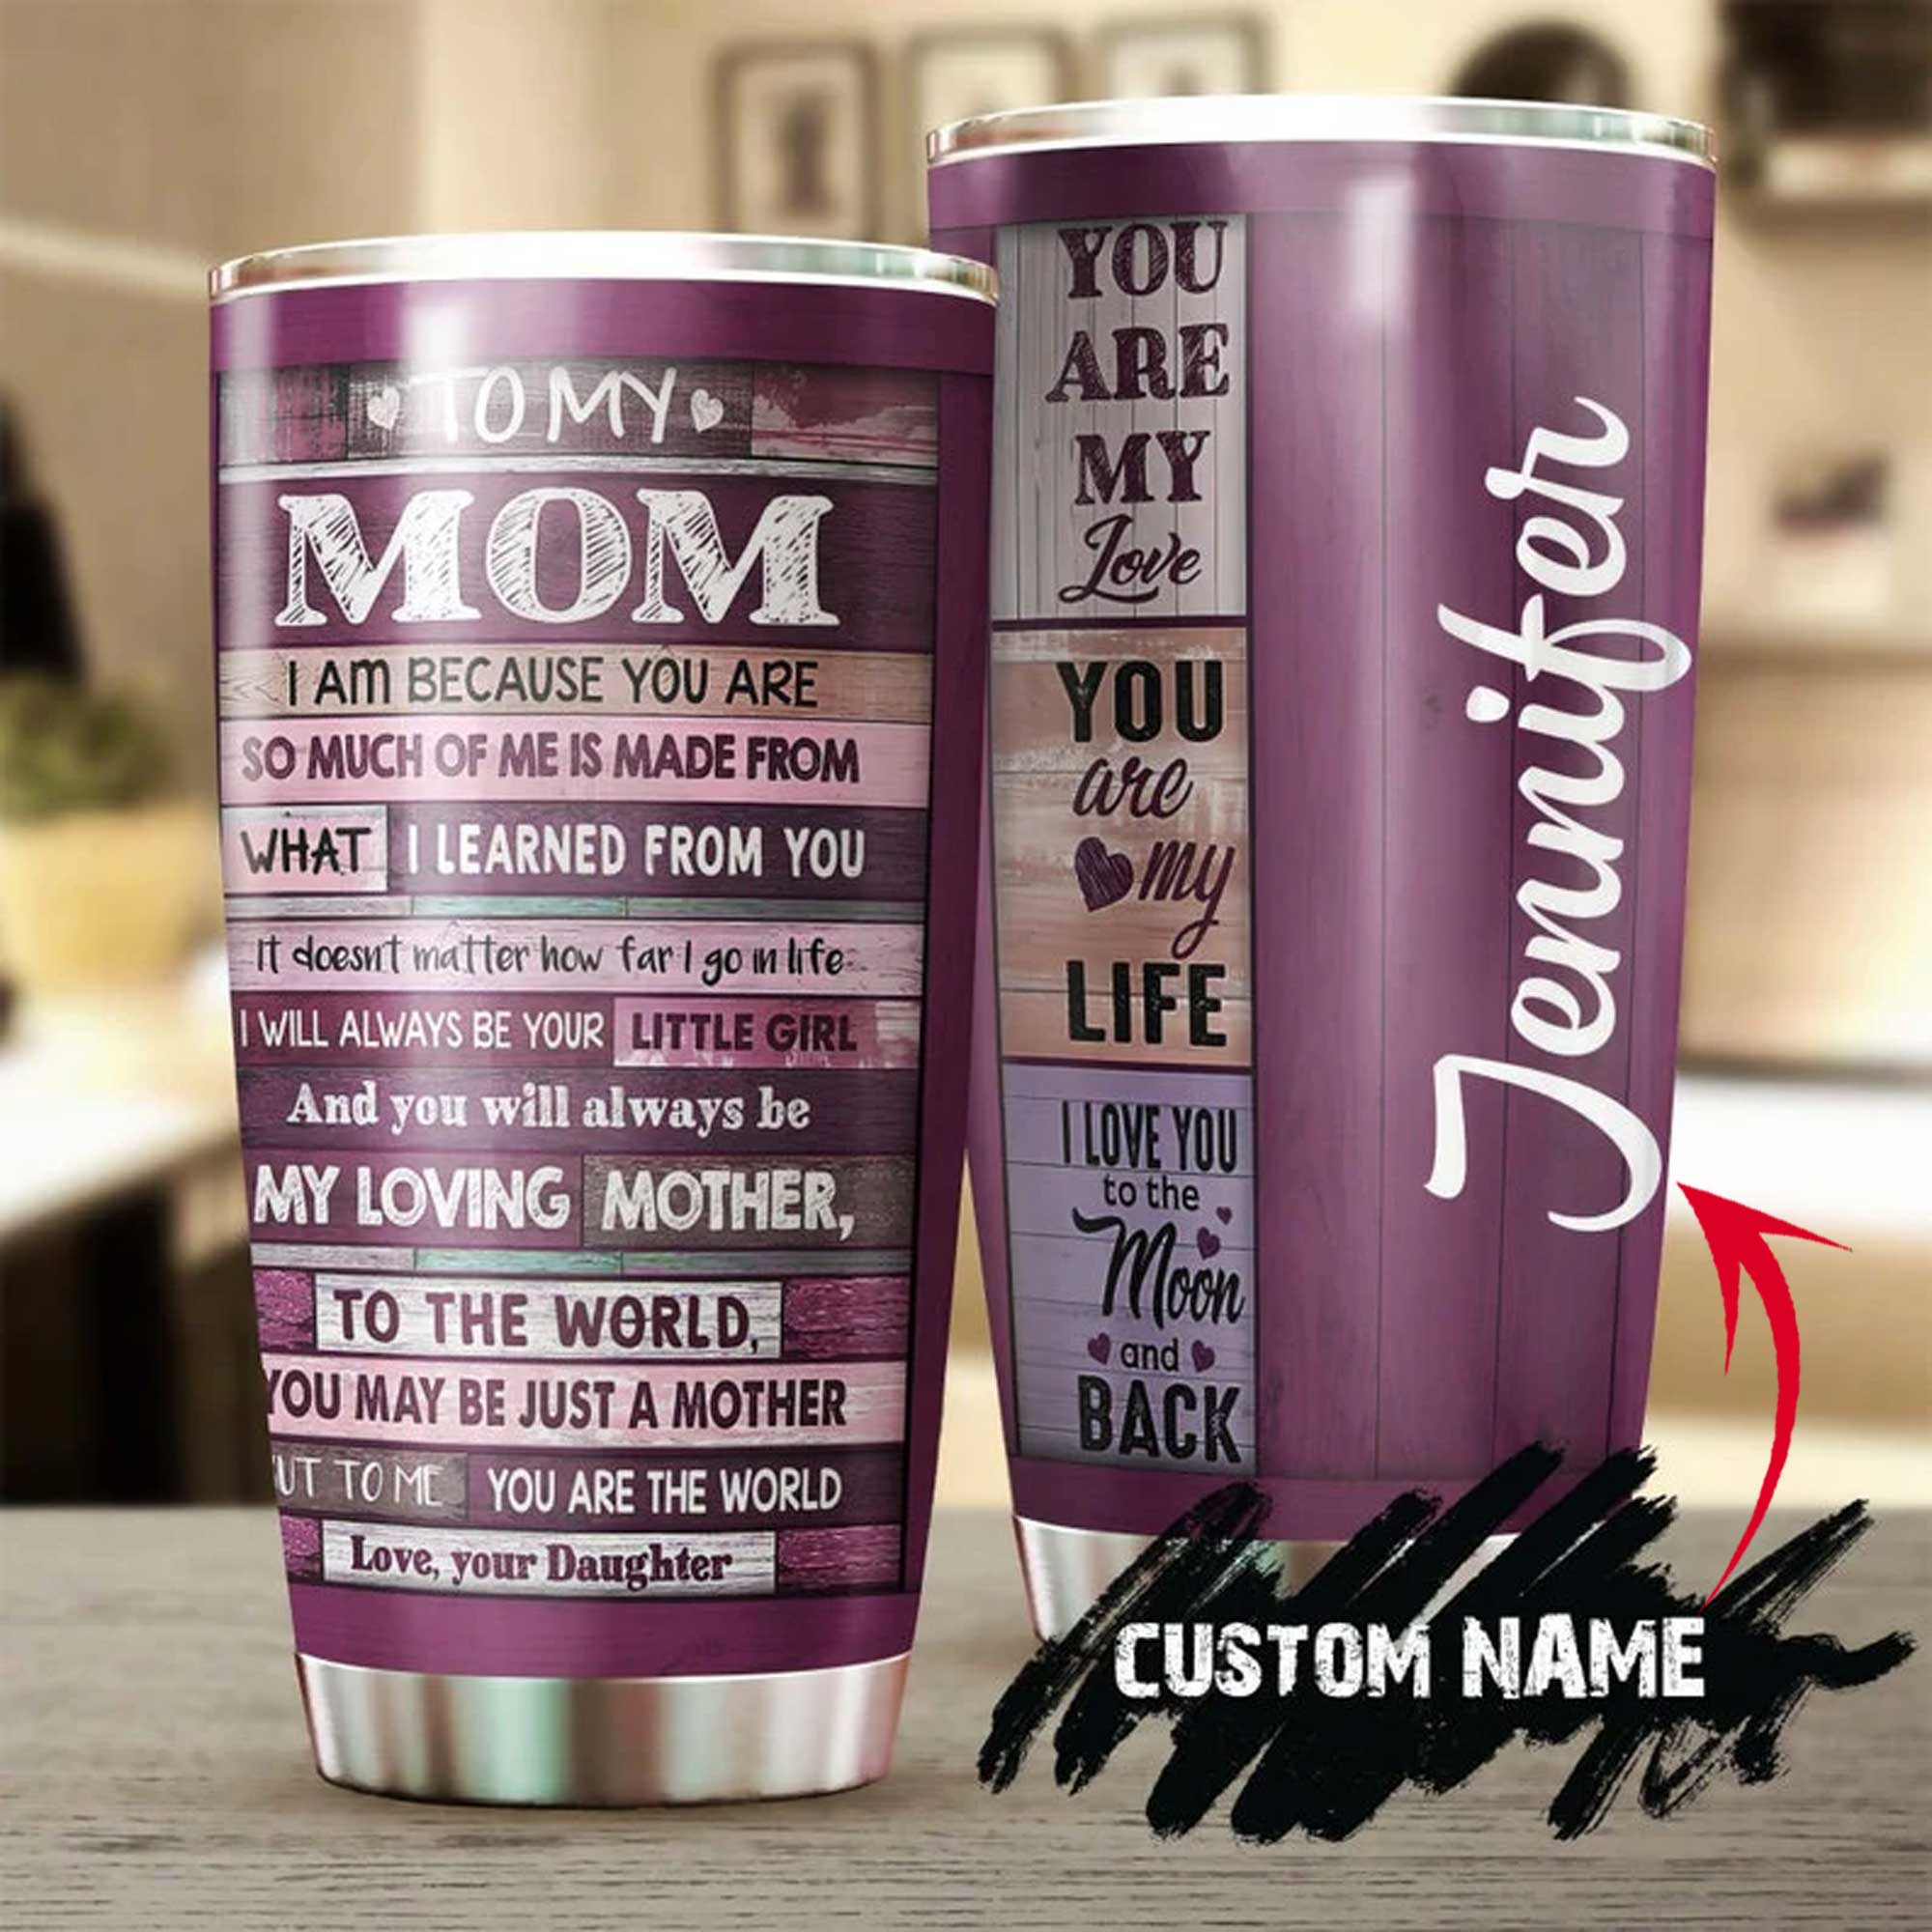 Personalized Mother's Day Gift Tumbler - Custom Gift For Mother's Day, Presents For Mom - You Are My Love My Life I Love You To The Moon Tumbler